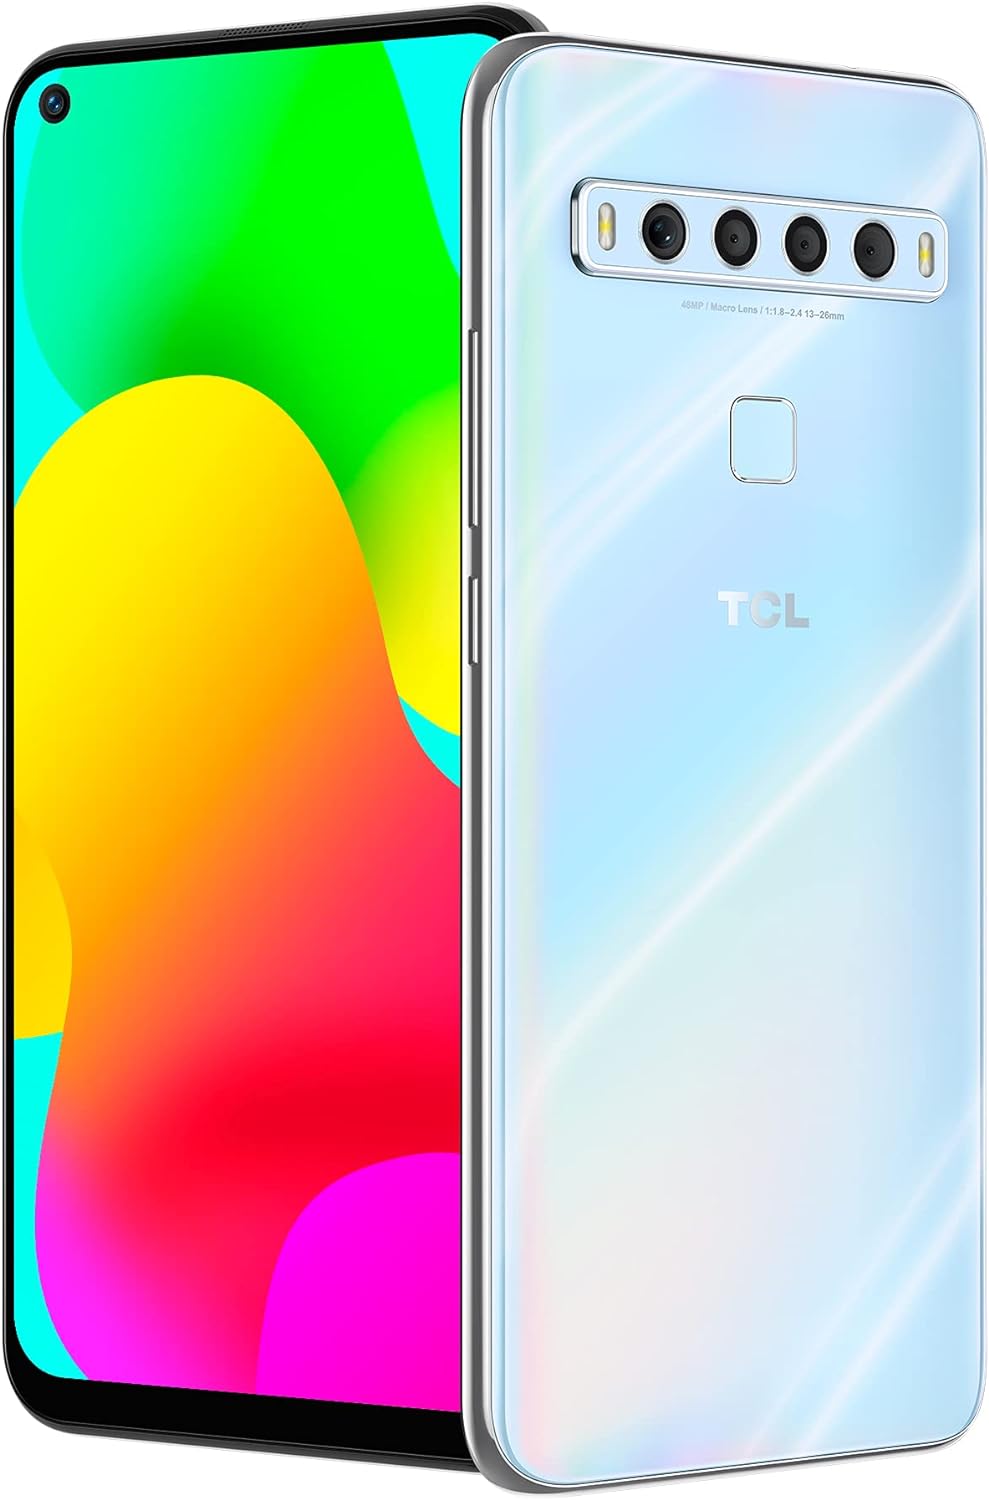 TCL 10L, Unlocked Android Smartphone with 6.53" FHD + LCD Display, 48MP Quad Rear Camera System, 64GB+6GB RAM, 4000mAh Battery - Arctic White